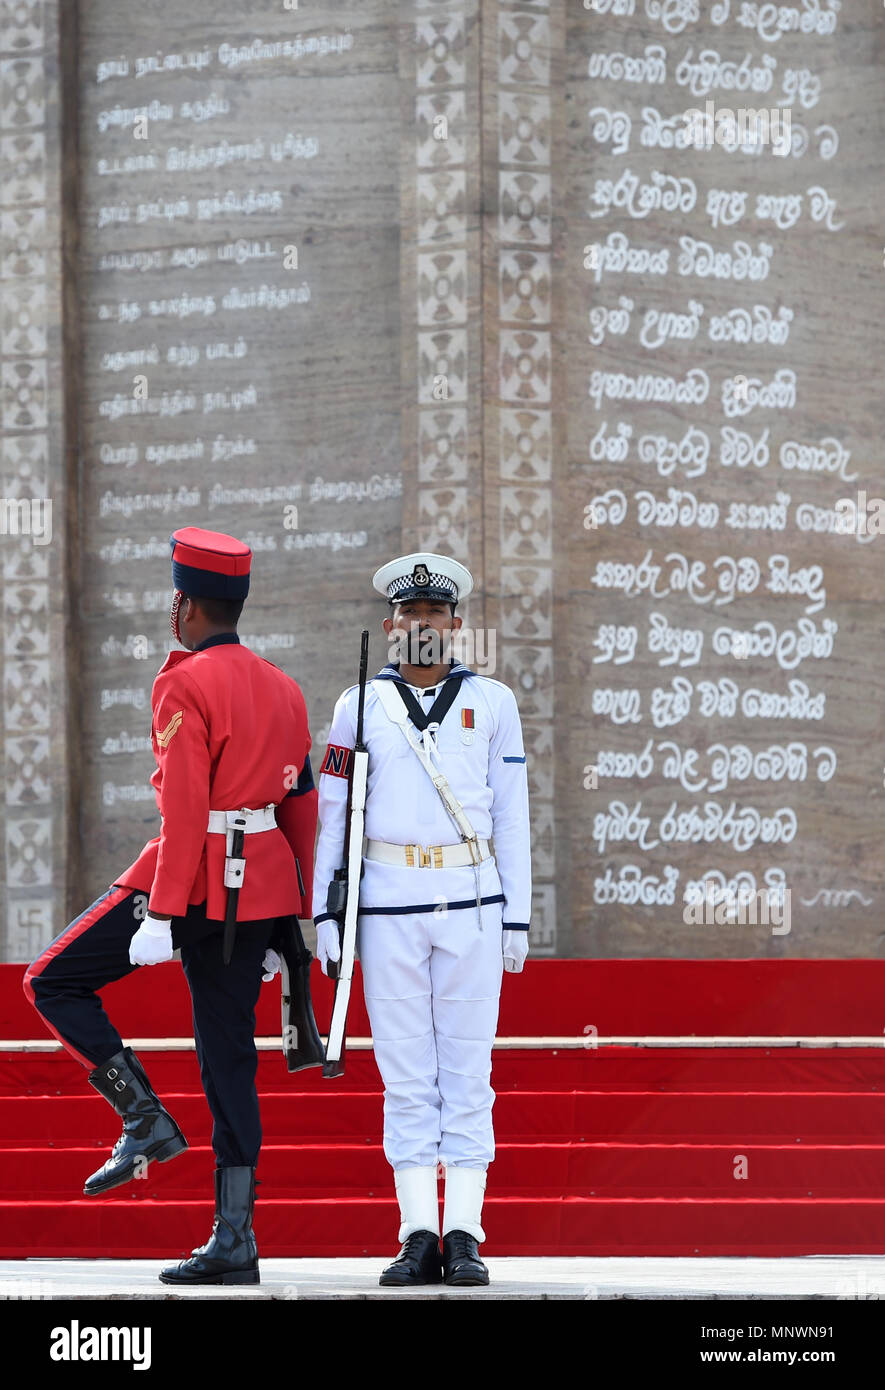 Colombo, Sri lanka. 19th May, 2018. Sri Lankan soldiers are seen at a memorial for the fallen soldiers during a commemorative ceremony marking the 9th anniversary of the end of the island's civil war in Colombo, Sri lanka, on May 19, 2018. Credit: A.S. Hapuarachc/Xinhua/Alamy Live News Stock Photo